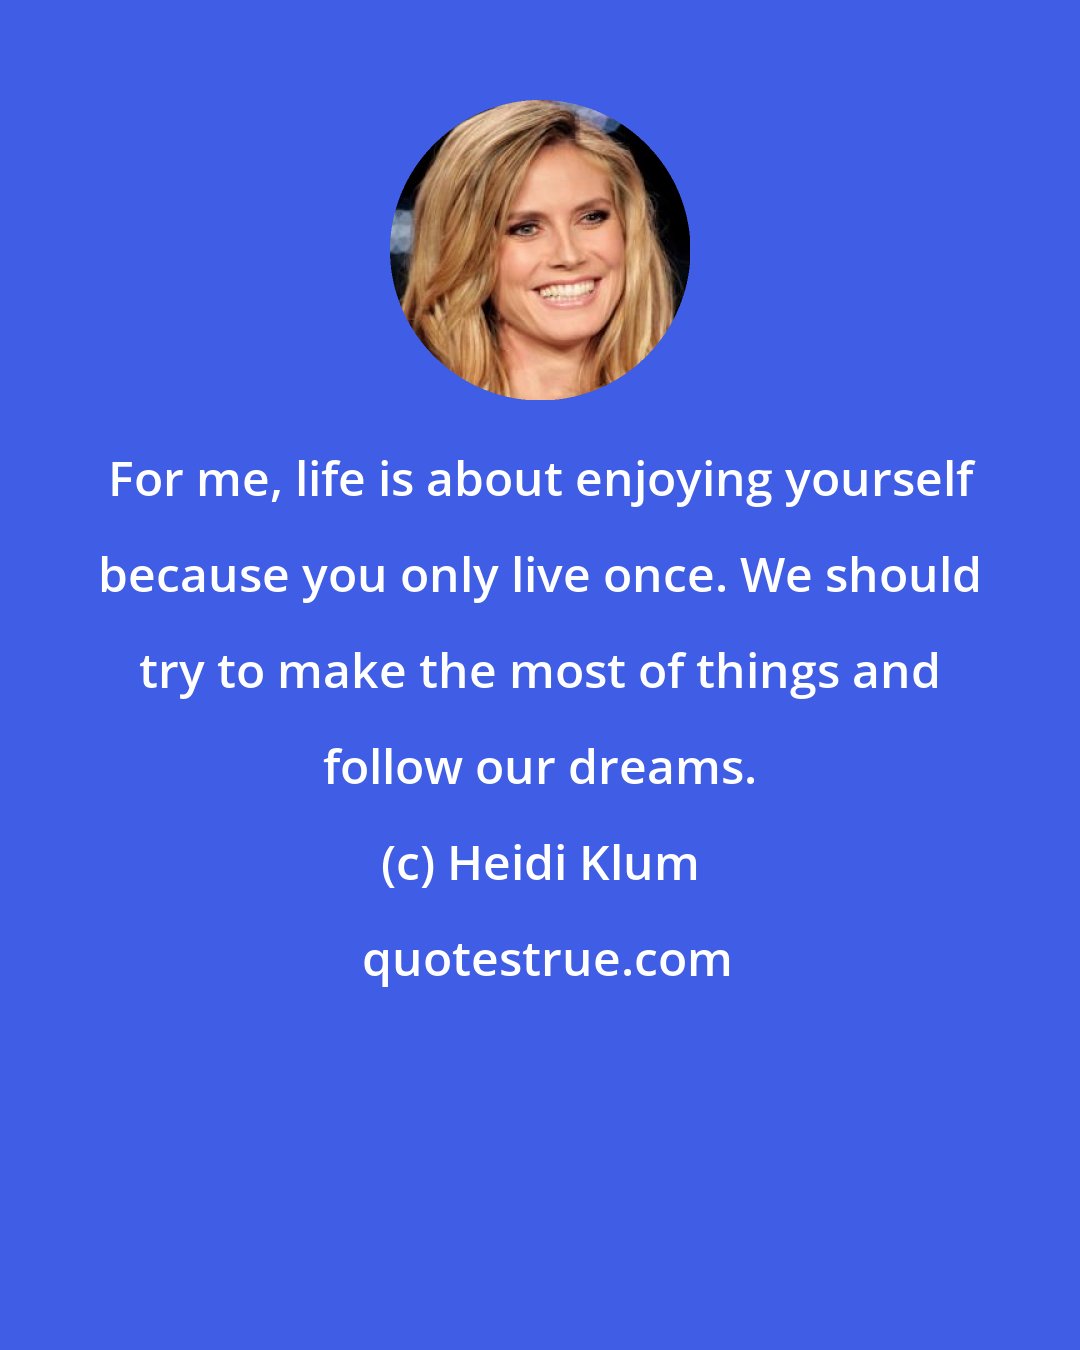 Heidi Klum: For me, life is about enjoying yourself because you only live once. We should try to make the most of things and follow our dreams.